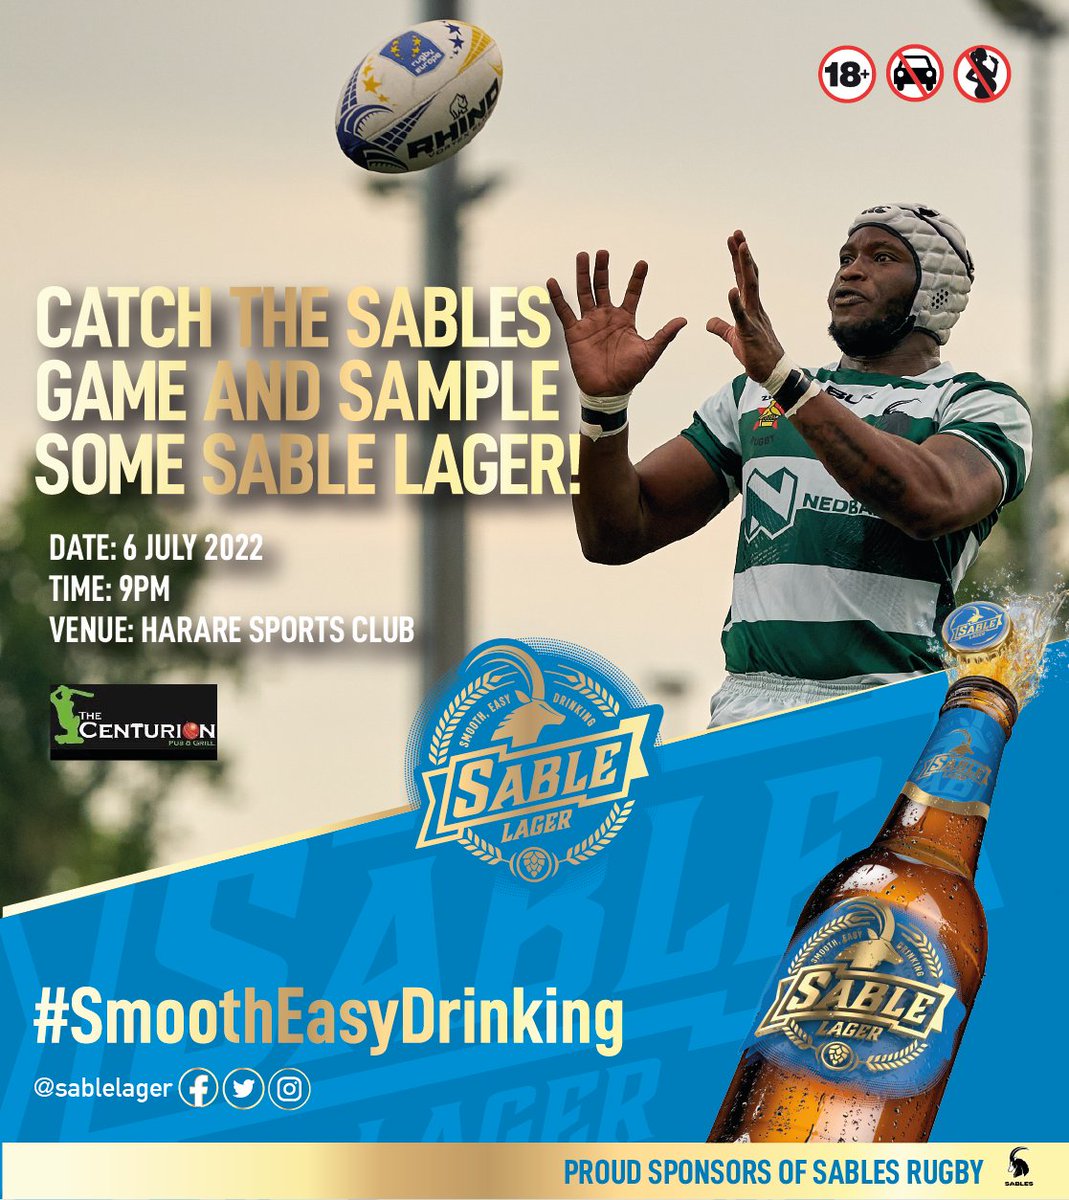 Come watch the @SablesRugbyZW play Namibia at Harare Sports Club this evening at 21:00 CAT and sample some Sable Lager! There's a place at the 2023 Rugby World Cup at stake so let's back the boys! #SmoothEasyDrinking #OurSables #OurSableLager #BackASable #RWCQualifiers #ZimRugby